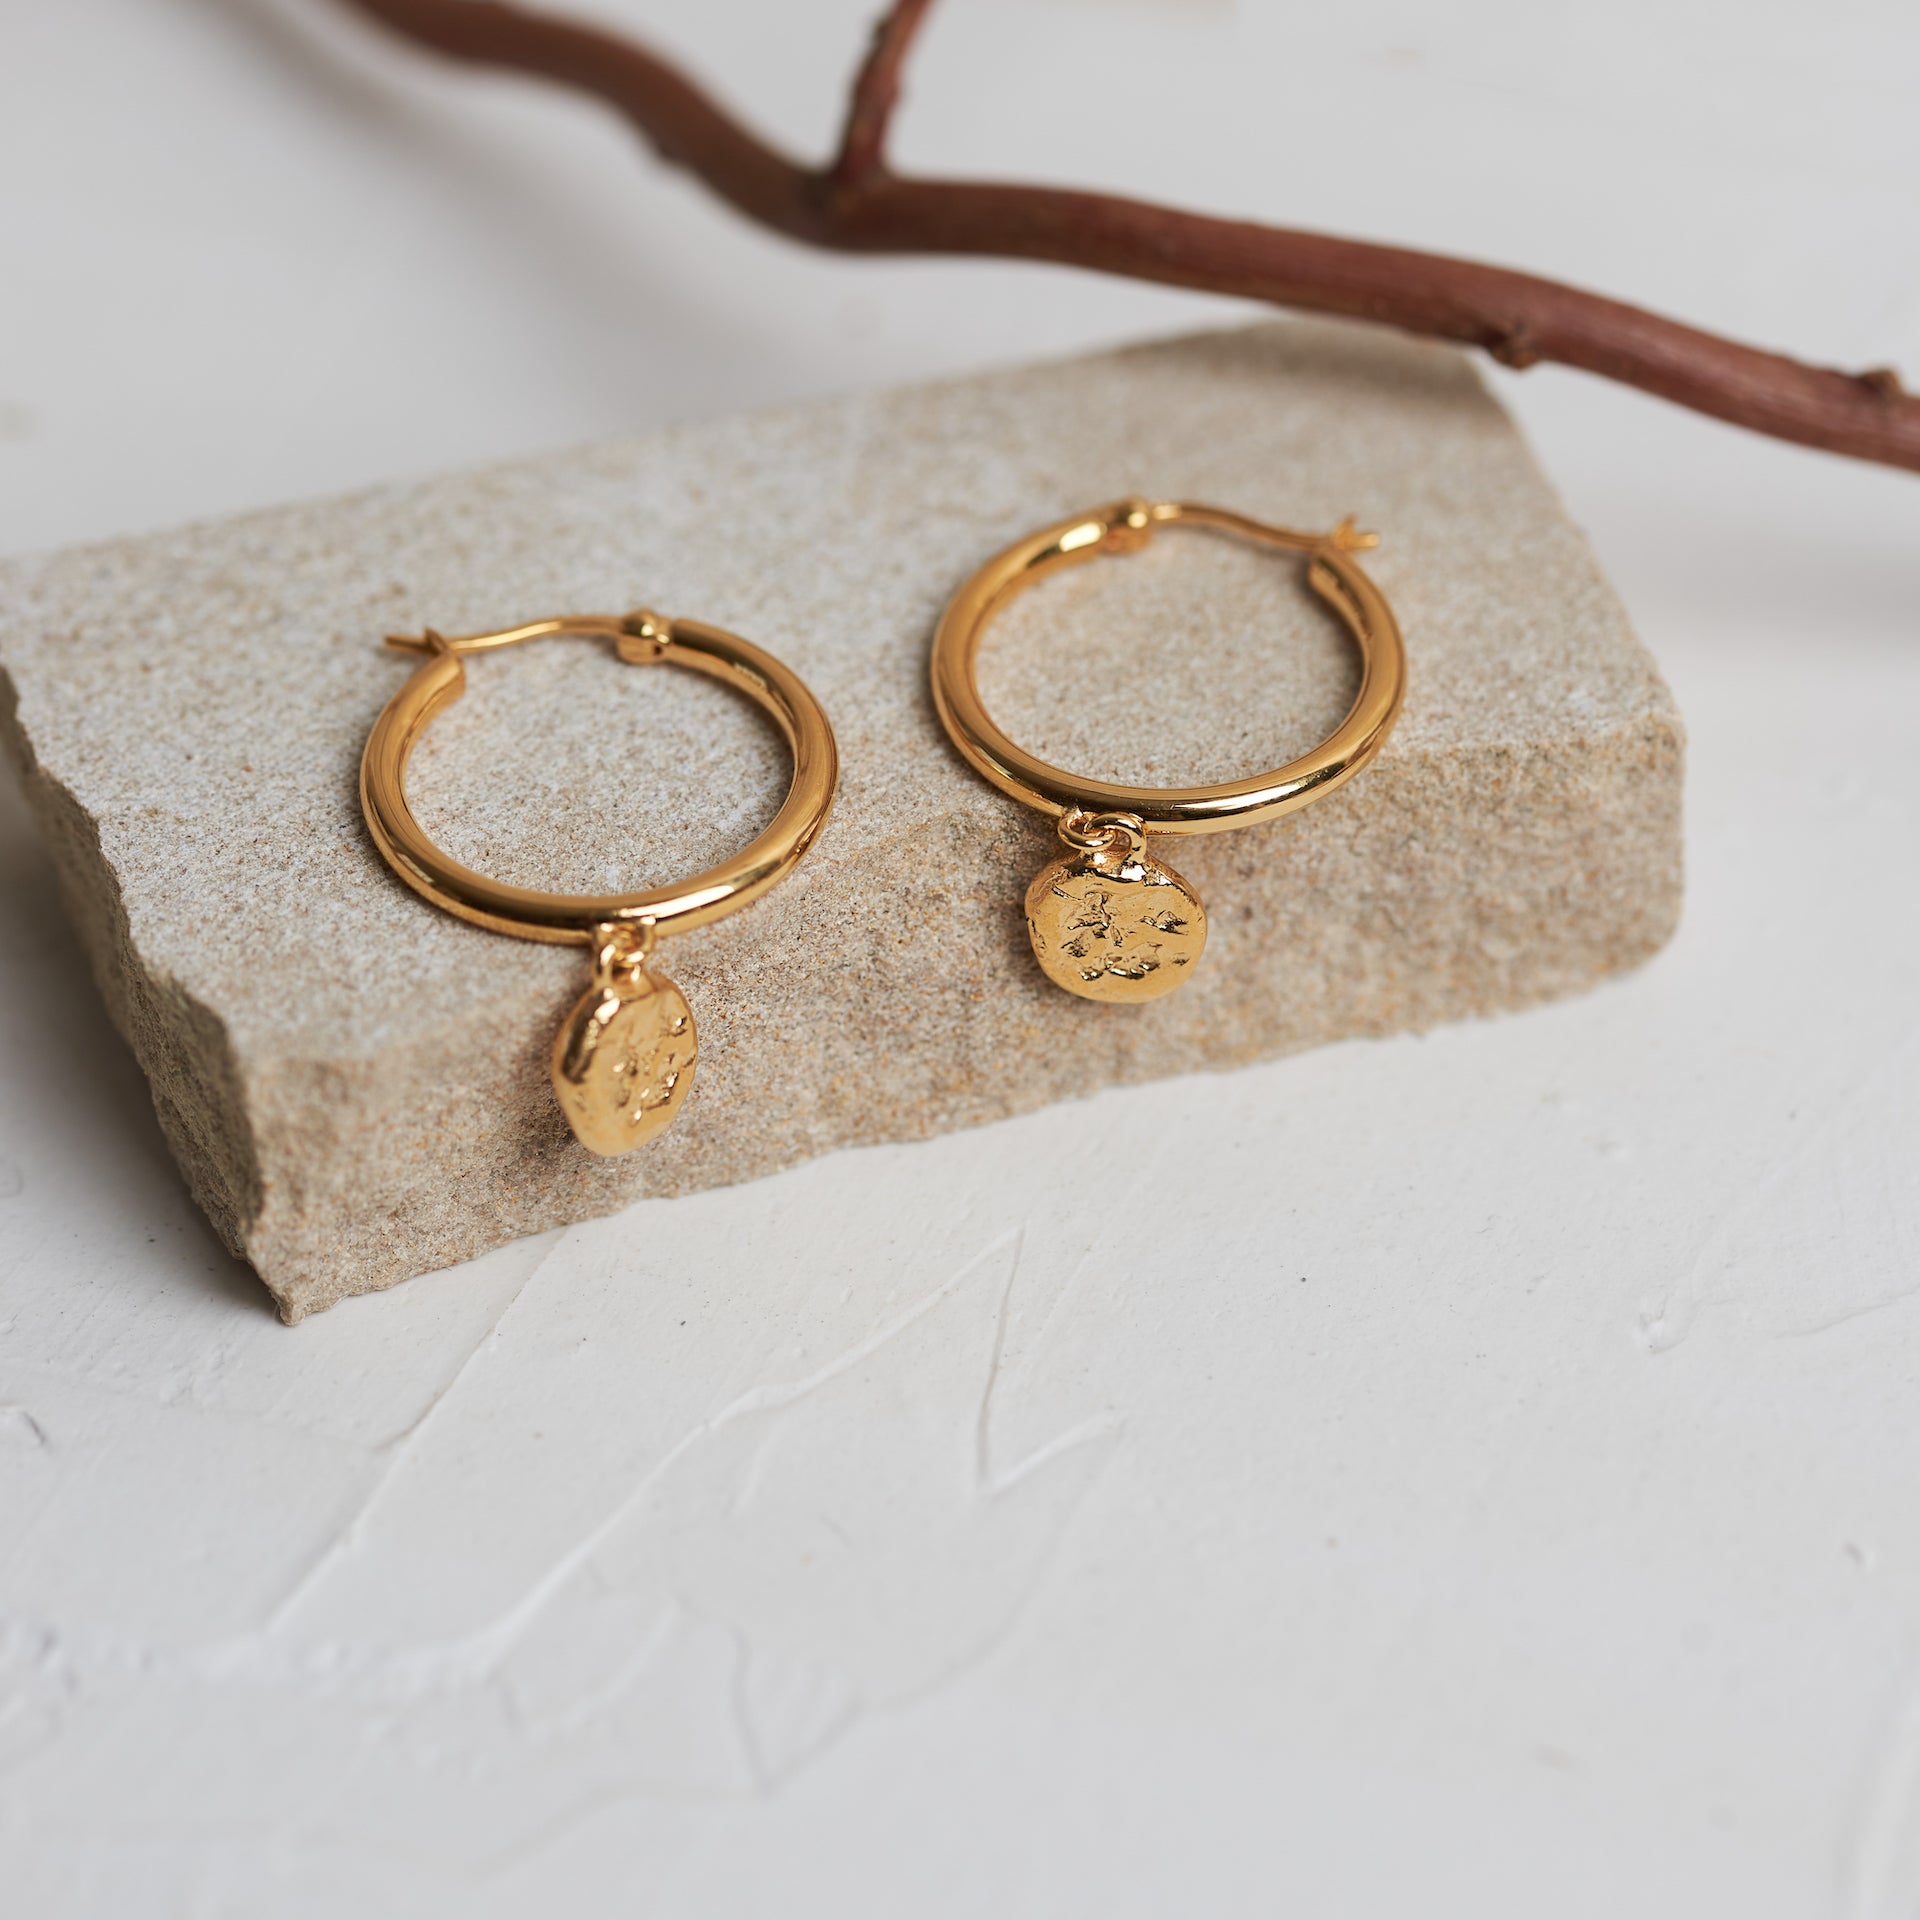 Designed by Megan Collins, the "Balance Hoops" are made to be worn as a reminder that life's beauty lies in the balance between hard work and play.